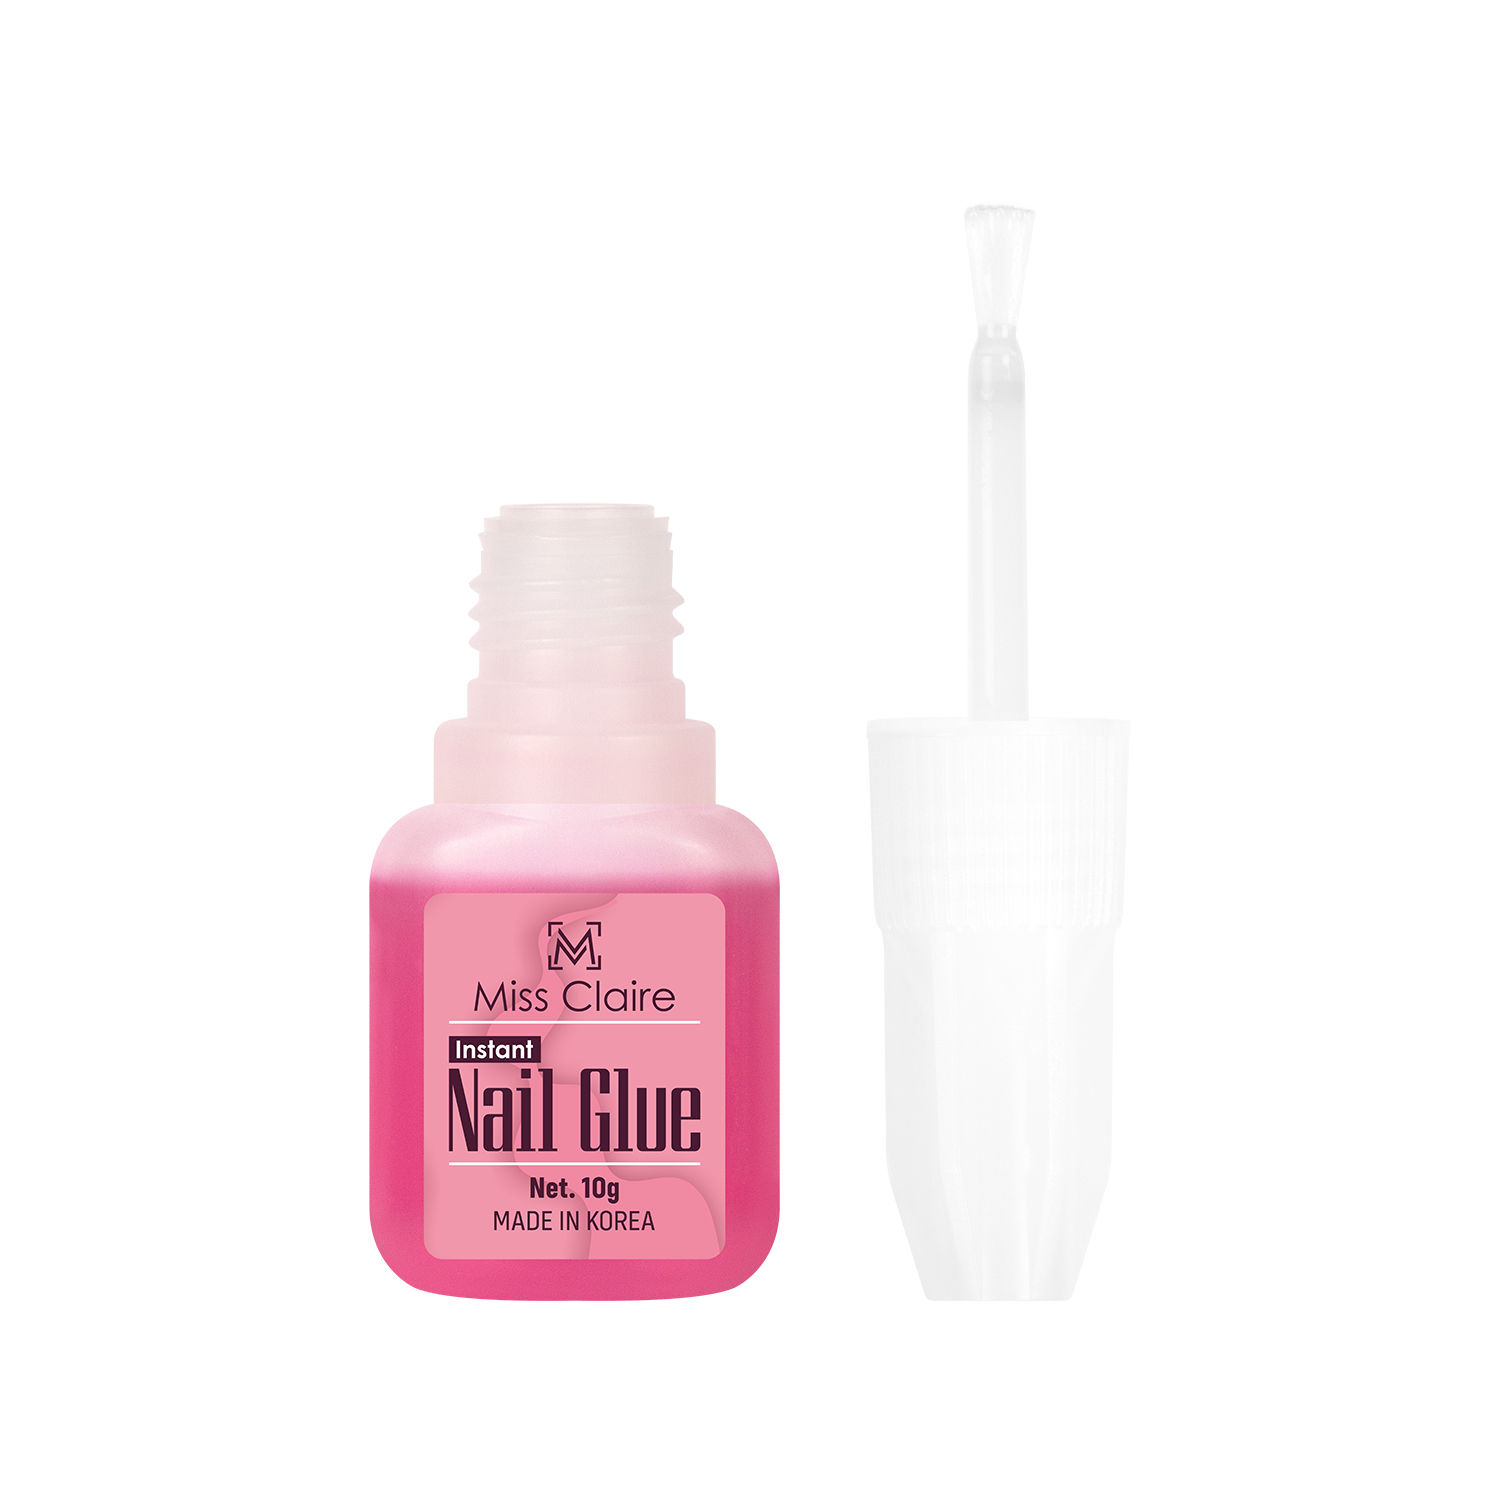 Buy Miss Claire Nails Glue Online